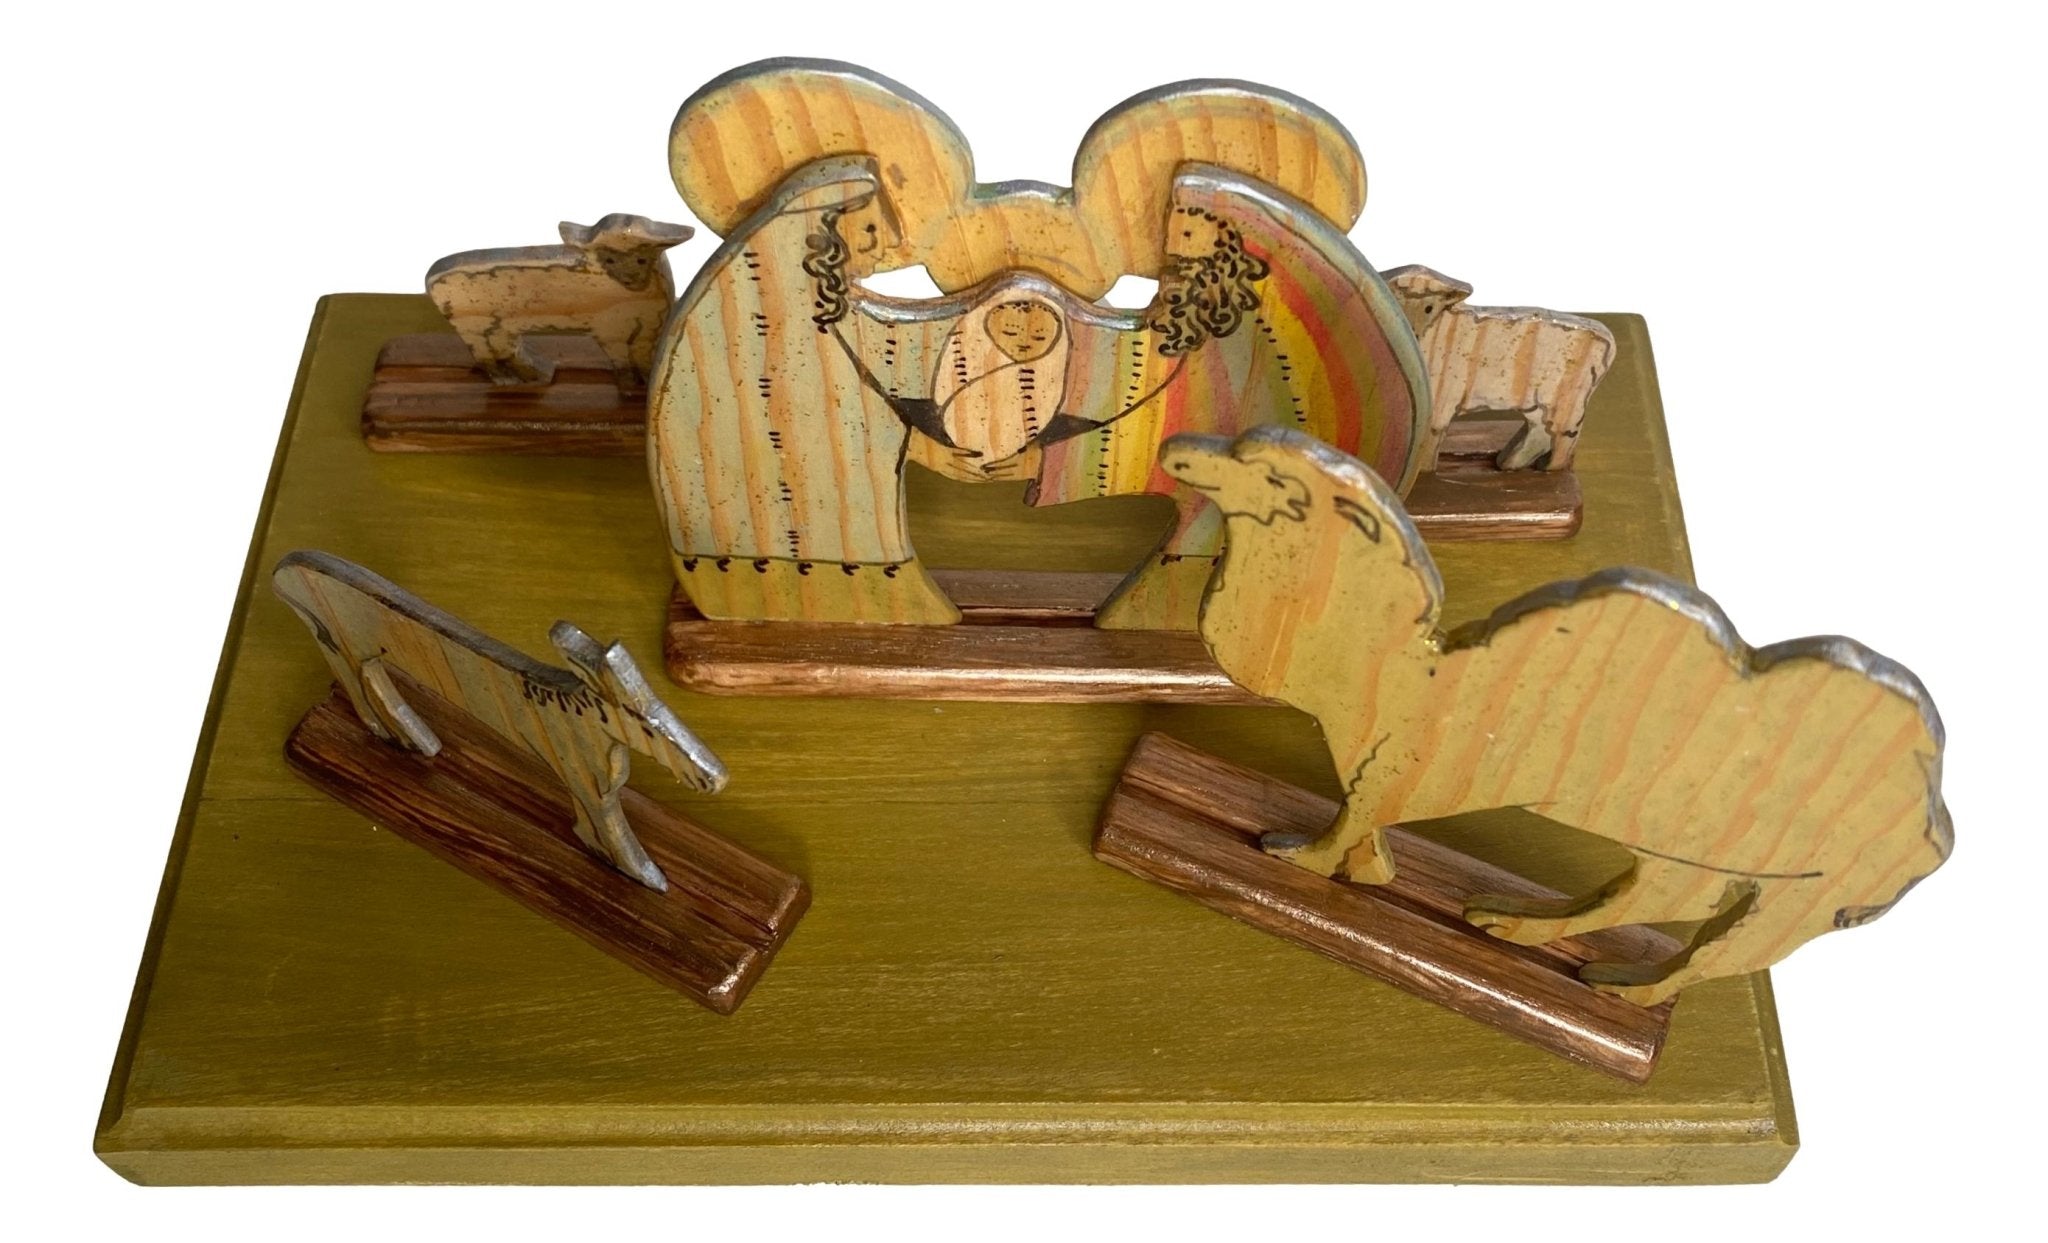 Nativity Scene Wood Board Figurines Handcrafted by Local Artist Norma 8 1/2 L x 5 1/2 W x 5 H Inches - Ysleta Mission Gift Shop- VOTED 2022 El Paso's Best Gift Shop